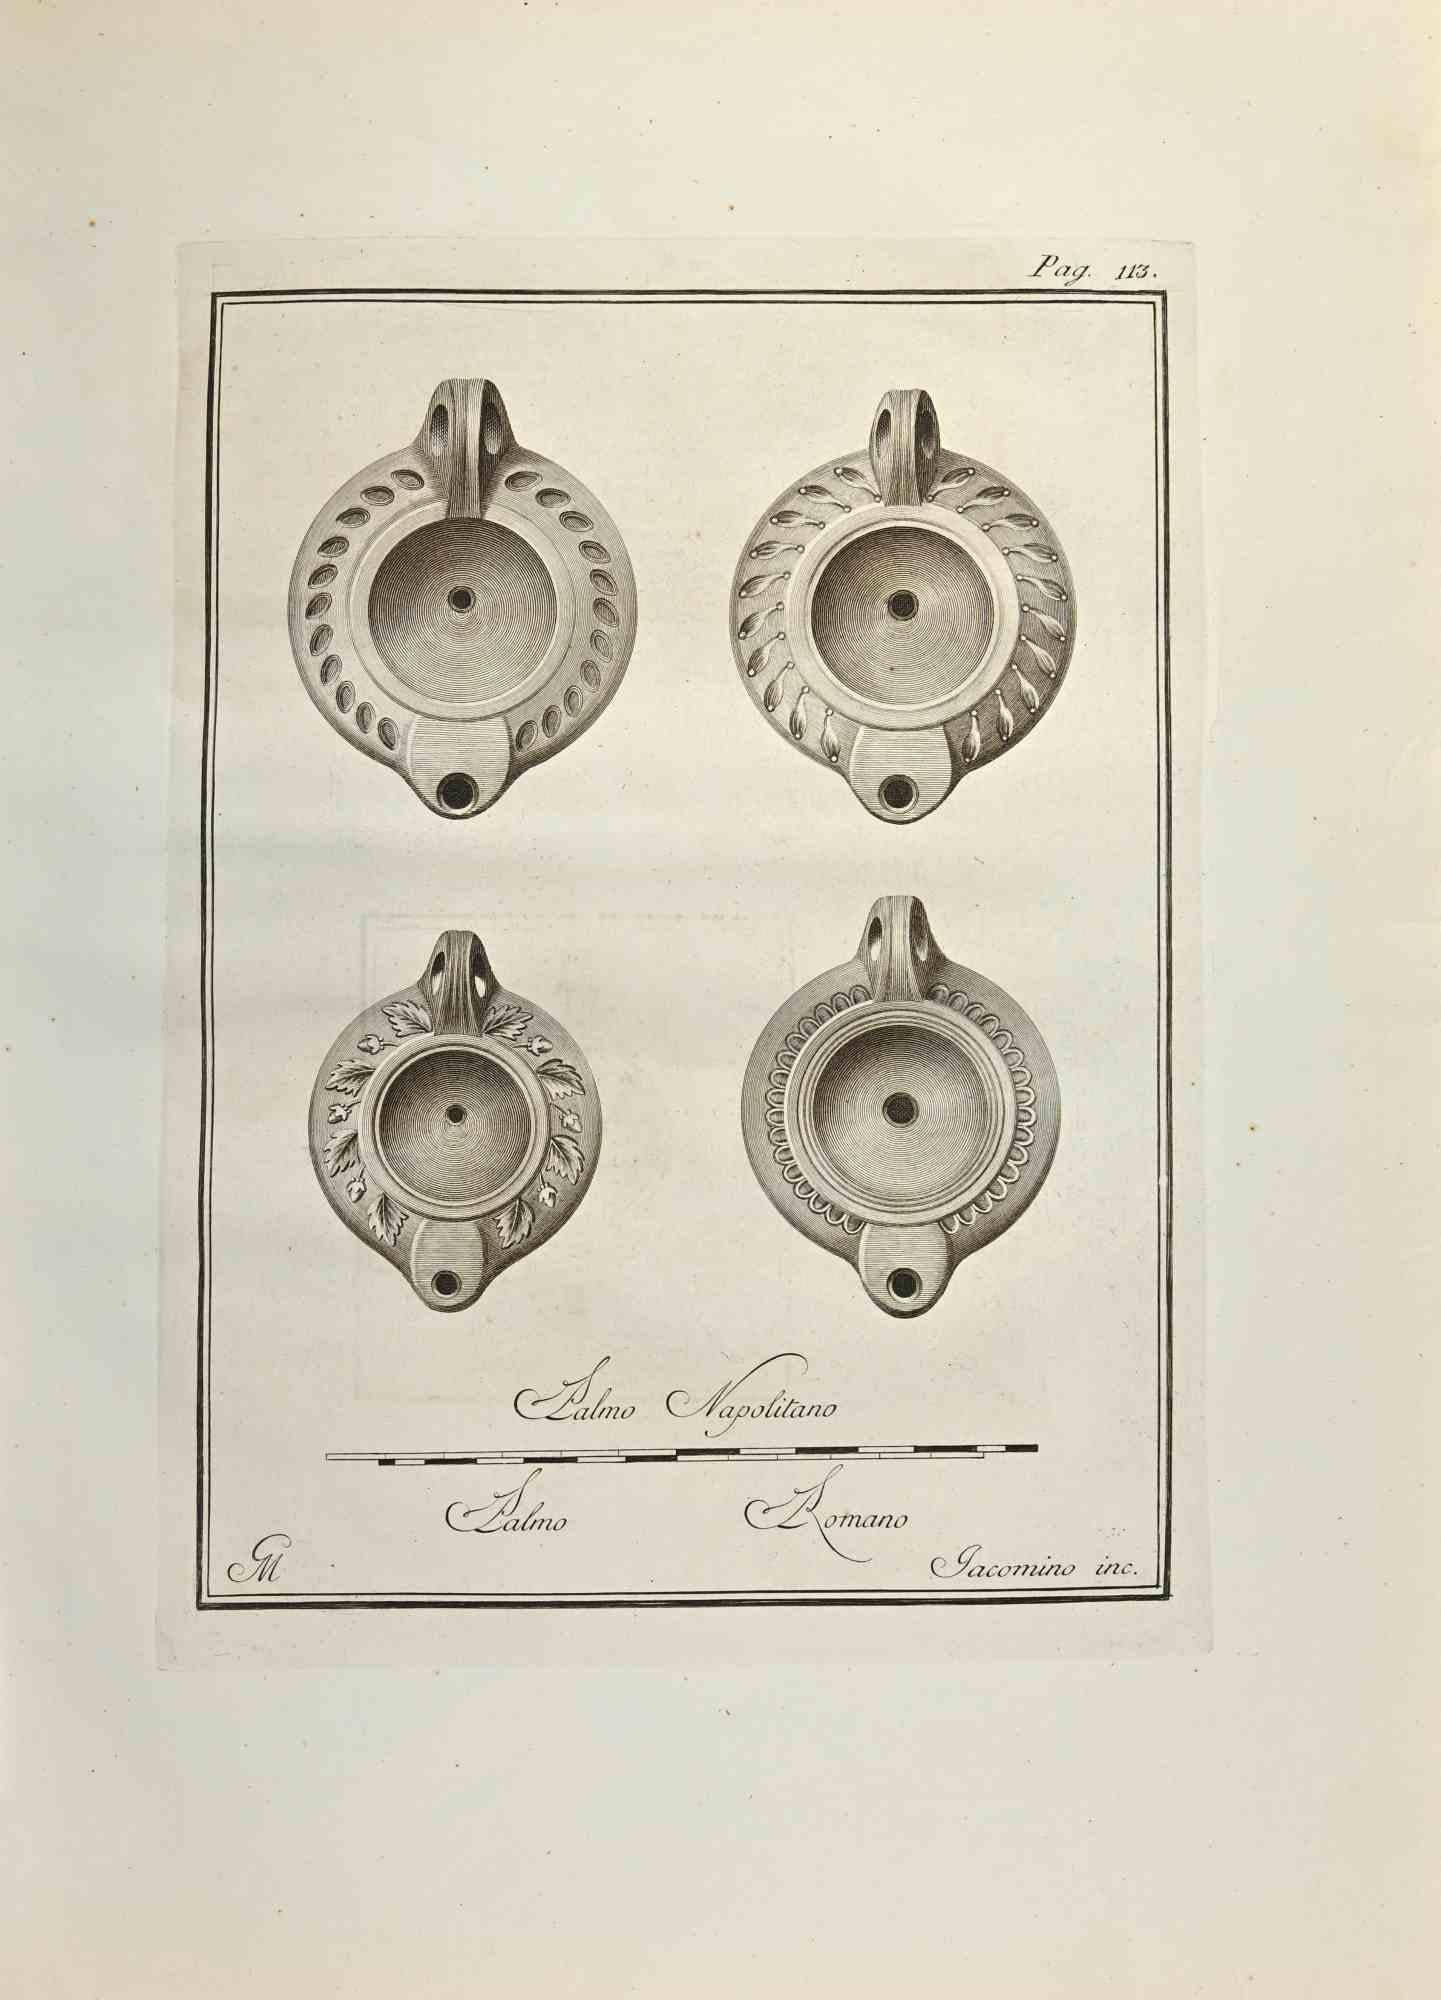 Pompeian Style Oil Lamps - Etching by Marcantonio Iacomino - 18th Century